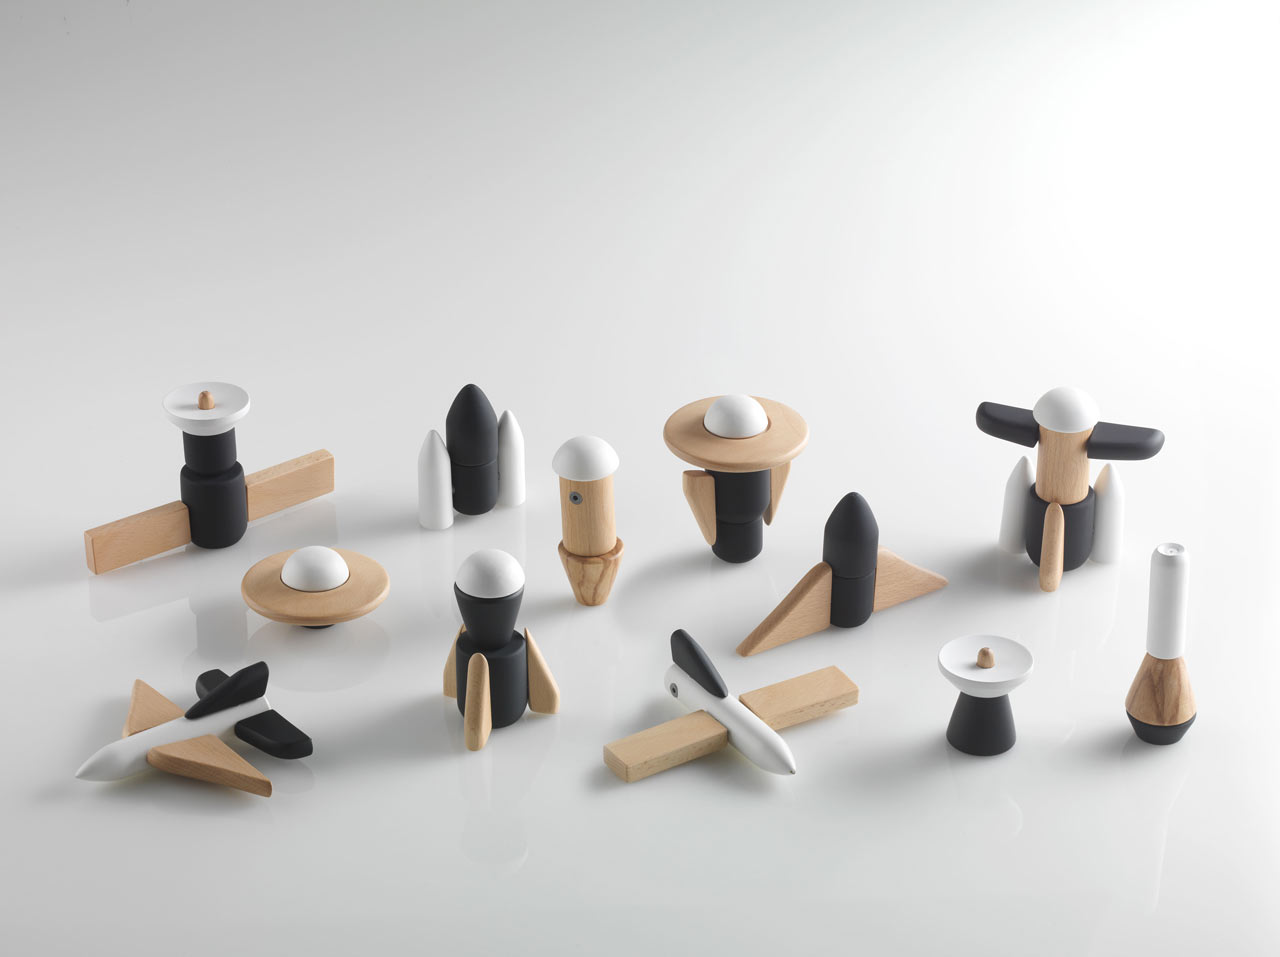 Huzi Design Launches a Space-Related Set of Magnetic Blocks